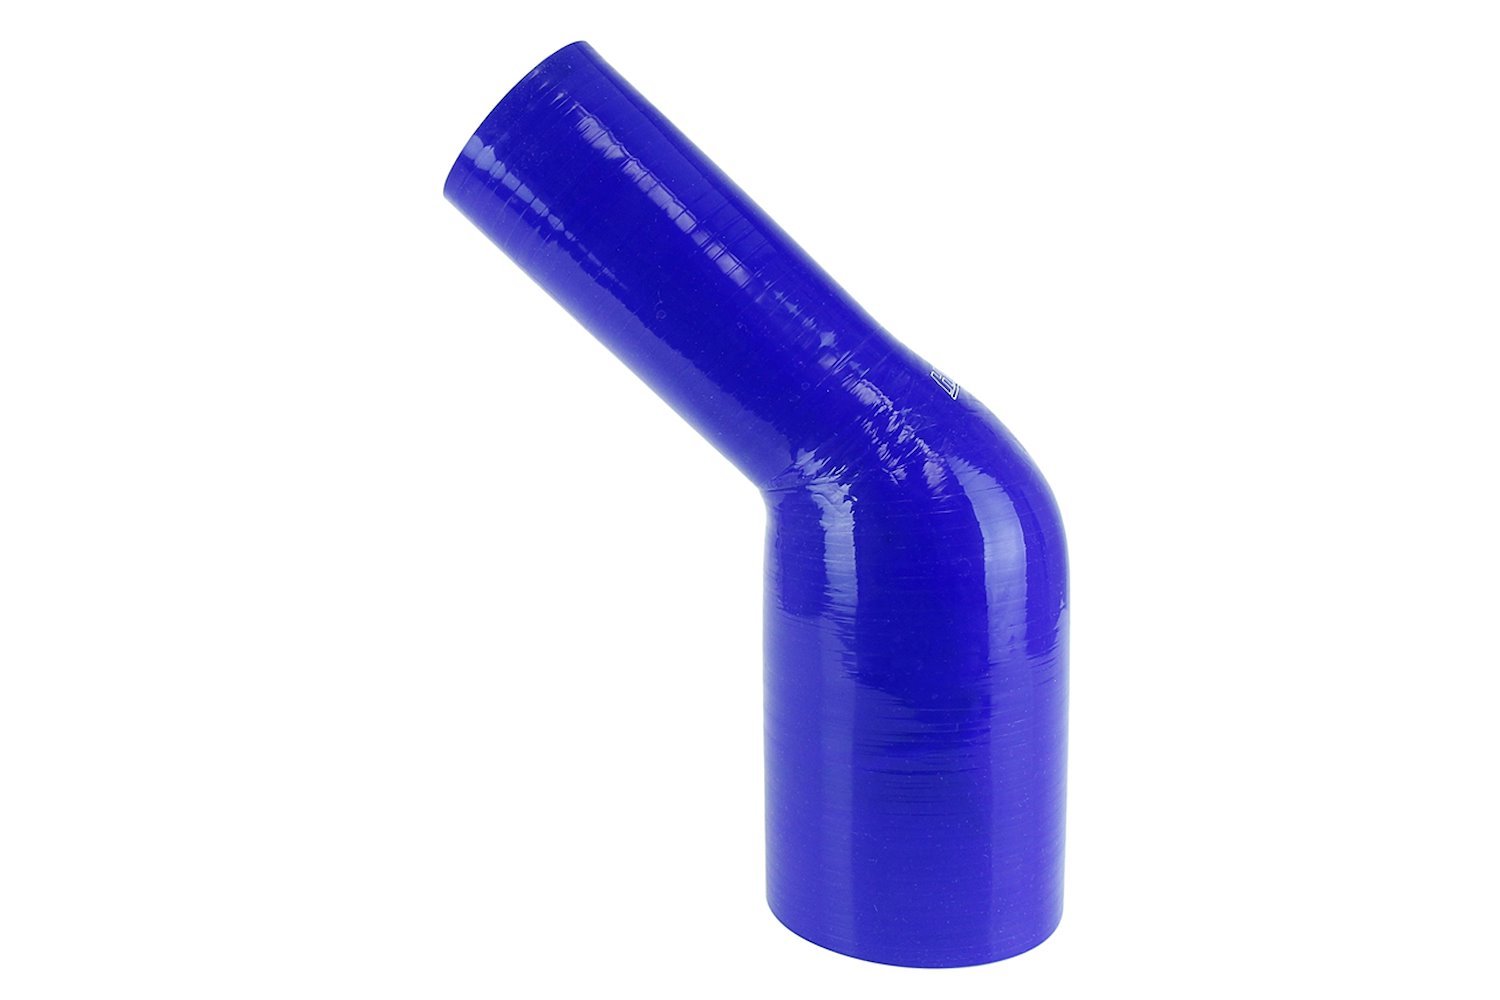 HTSER45-300-312-BLUE Silicone 45-Degree Elbow Hose, High-Temp 4-Ply Reinforced, 3 in. - 3-1/8 in. ID, Blue